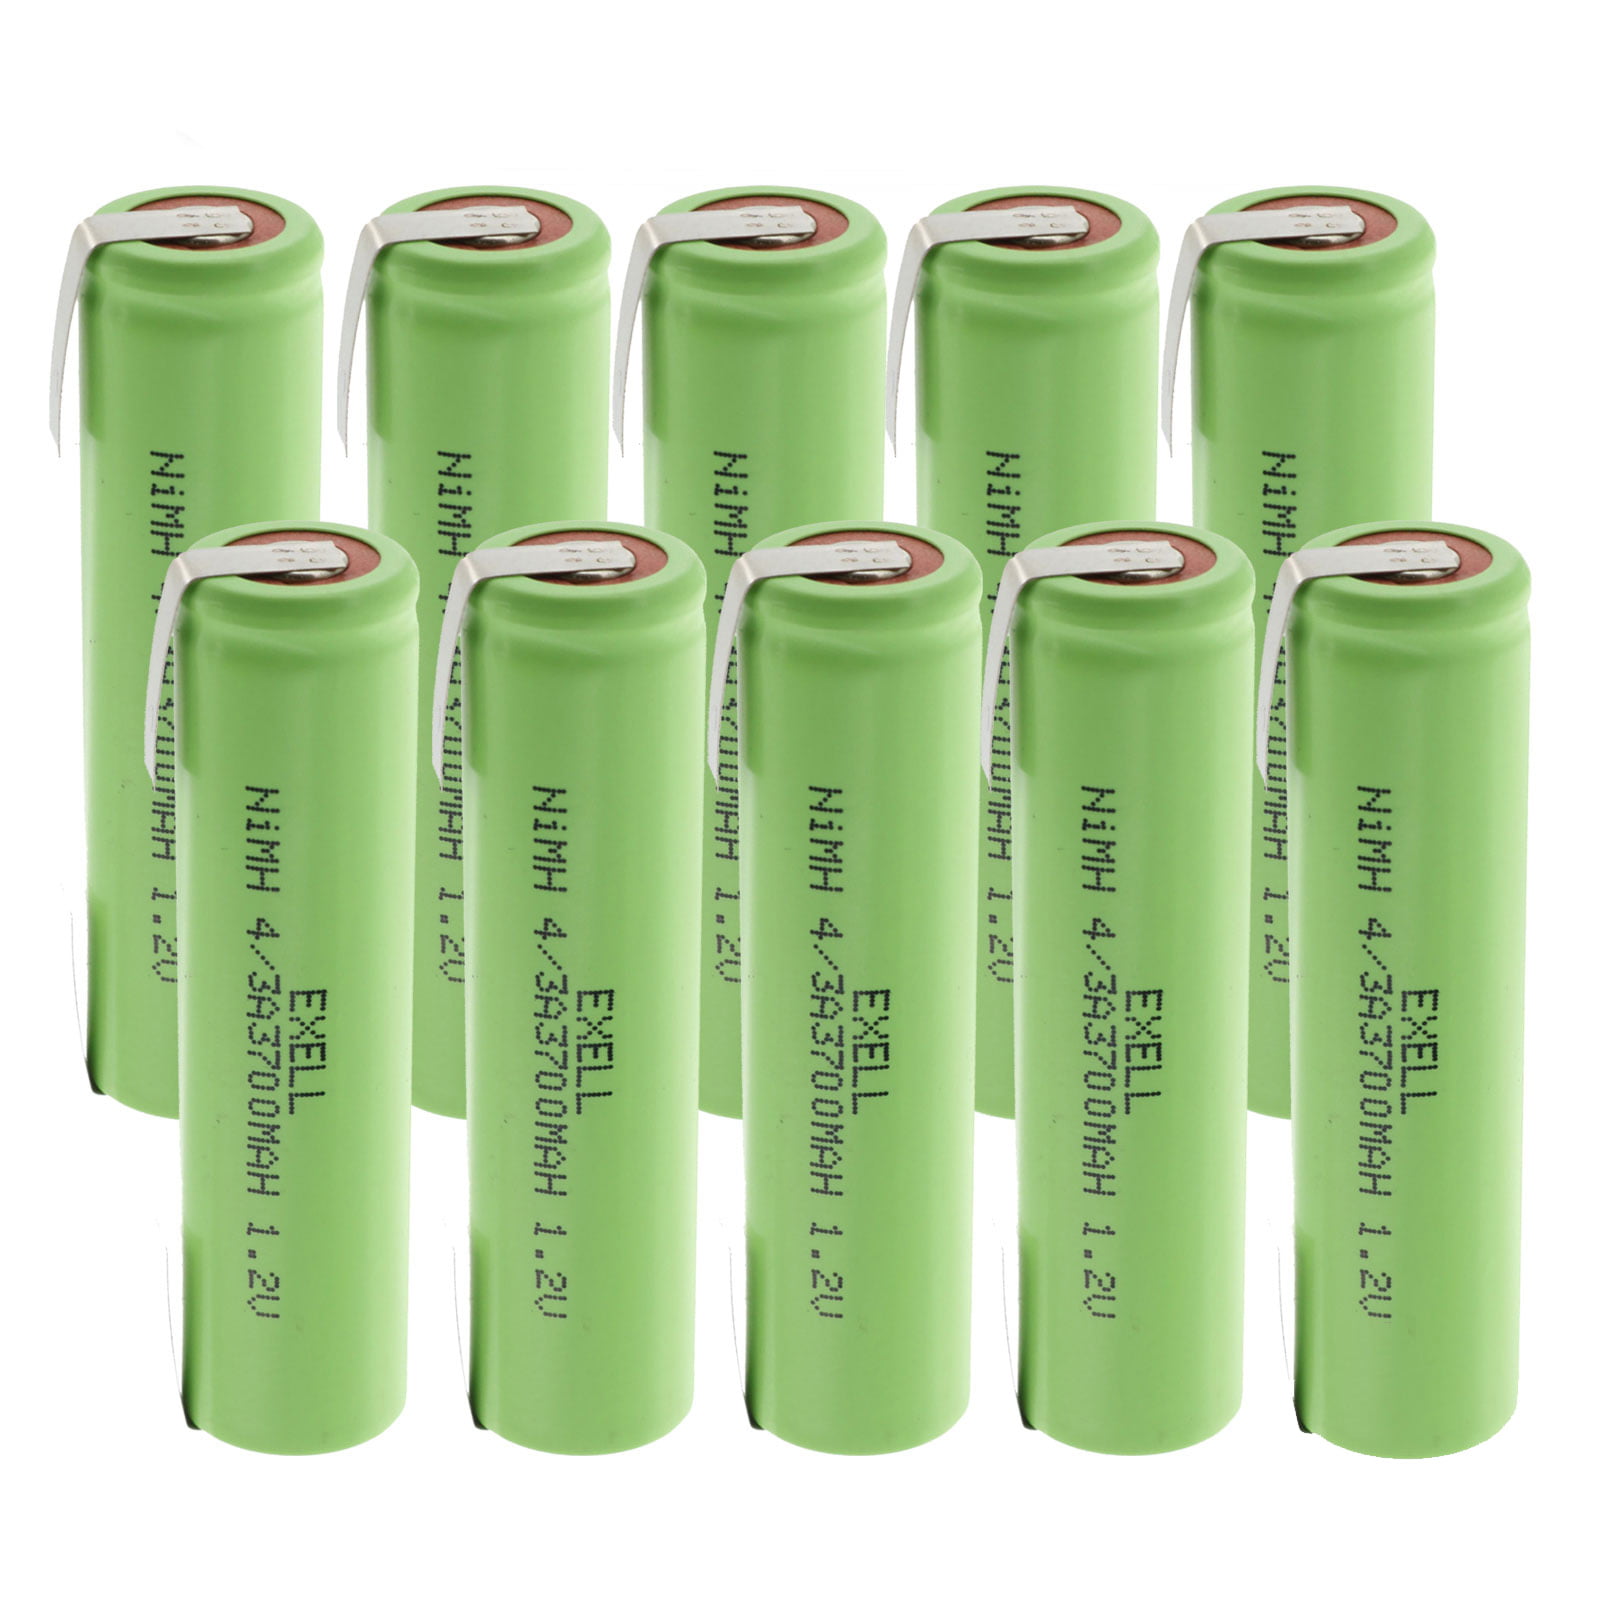 Meters 3x AA 1.2V Rechargeable 2 Button Top Batteries For LED Lights Tools